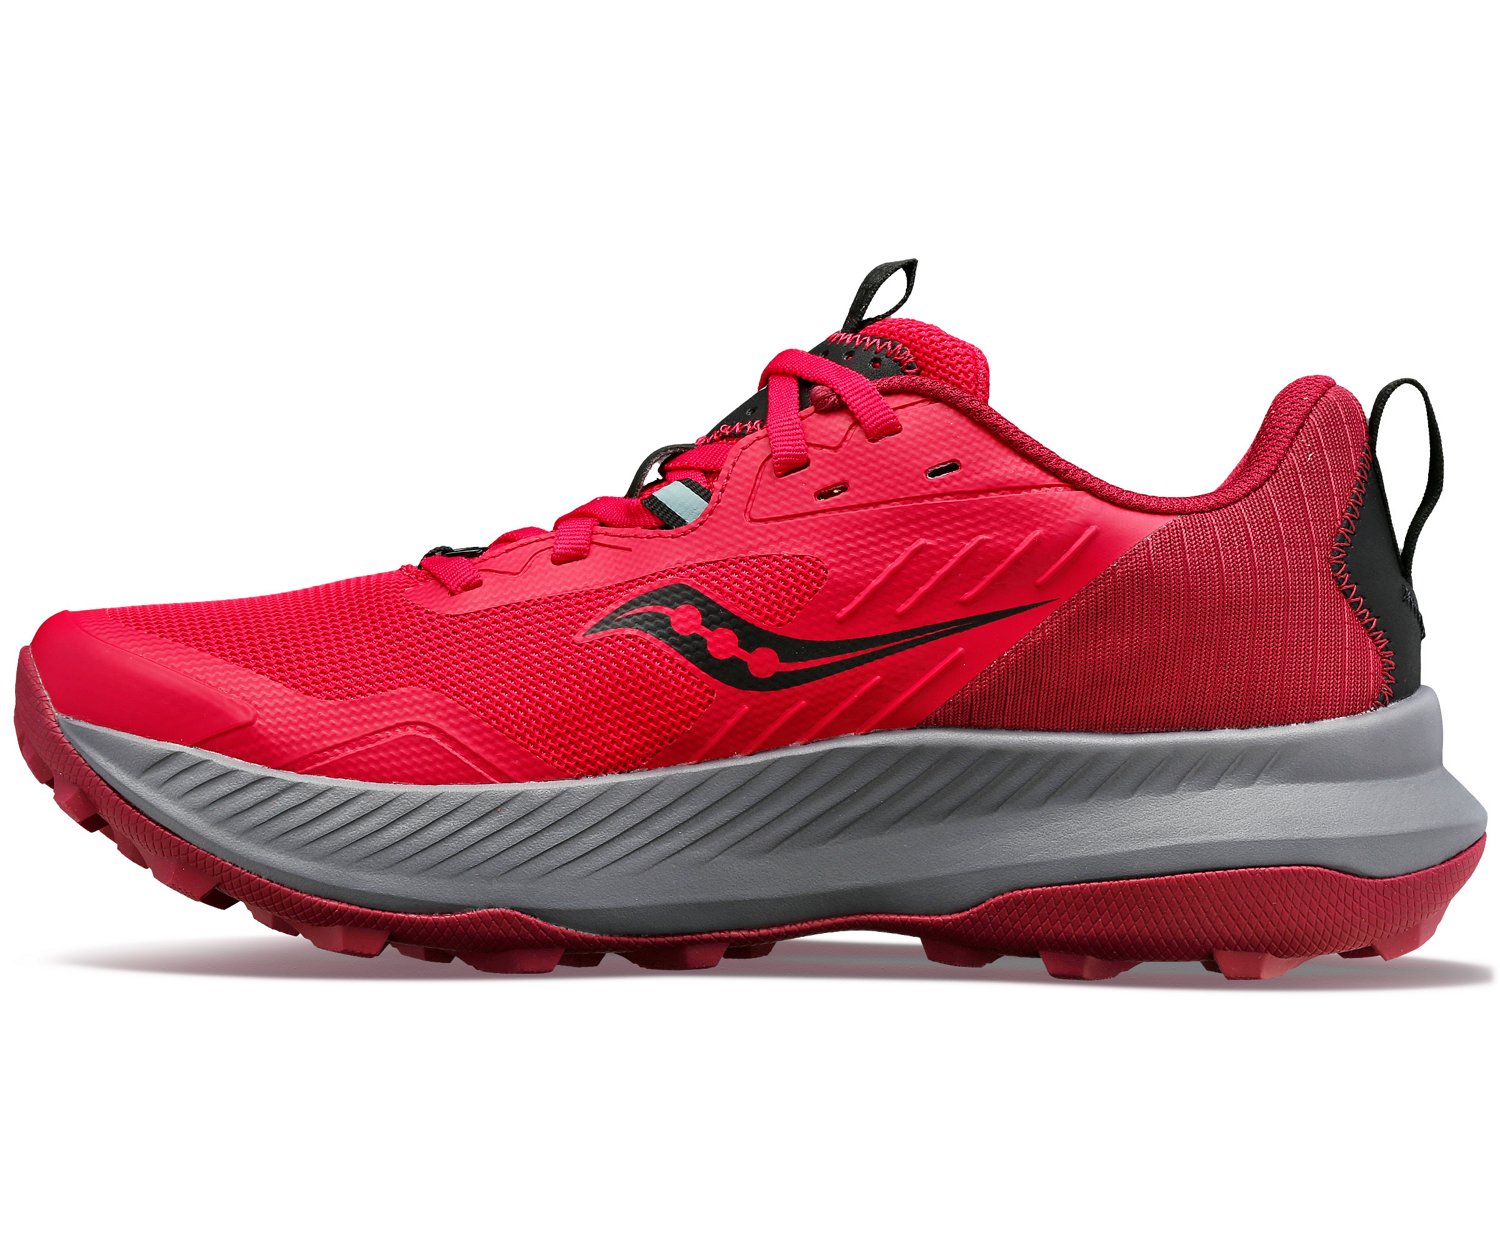 Saucony Women's Blaze TR Running Shoes | Free Shipping at Academy